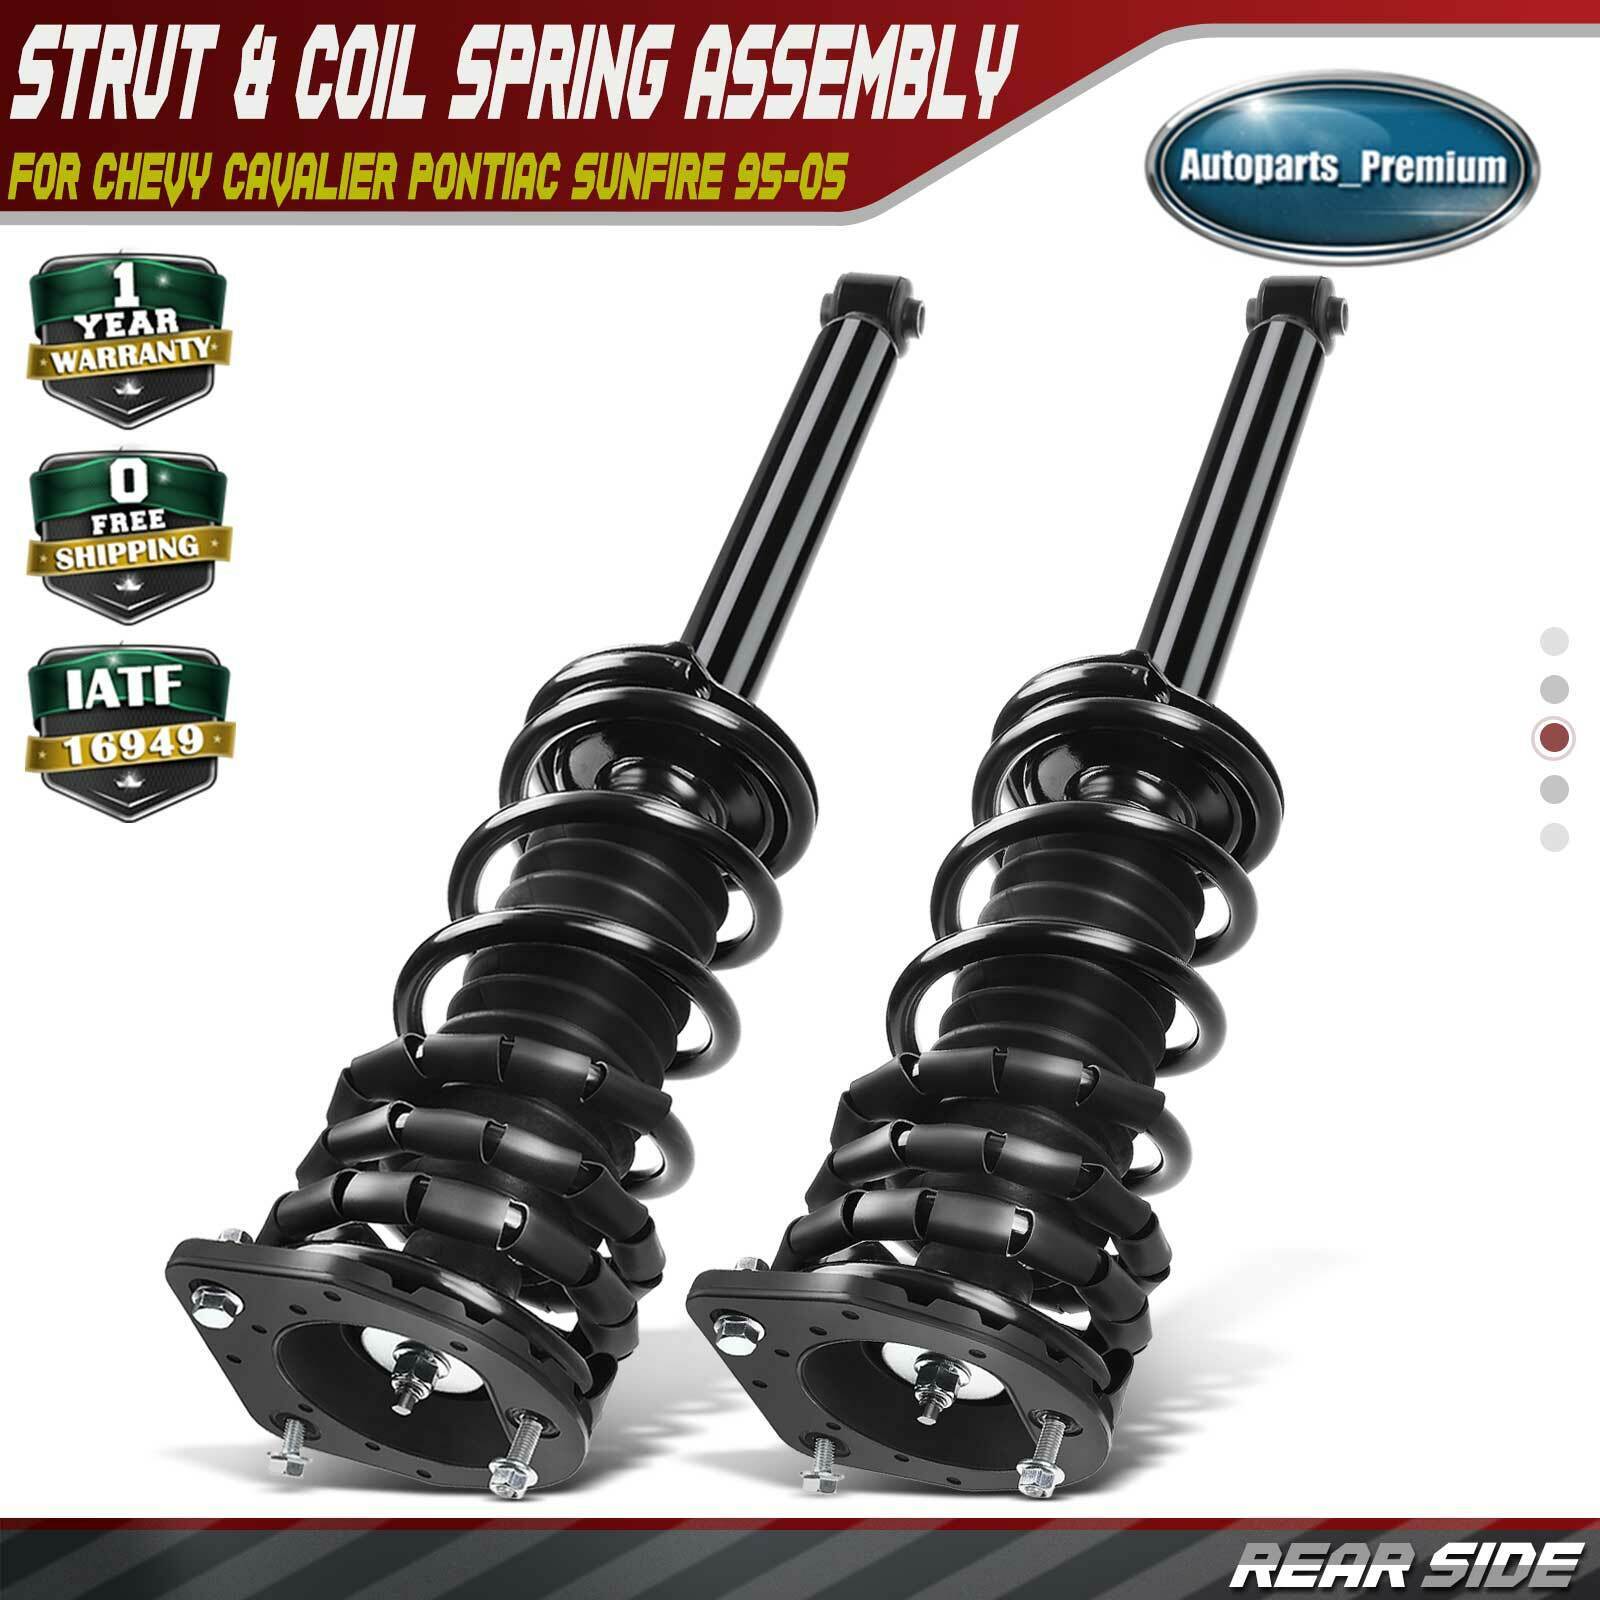 2x Rear Complete Strut & Coil Spring Assembly for Chevy Cavalier Pontiac Sunfire